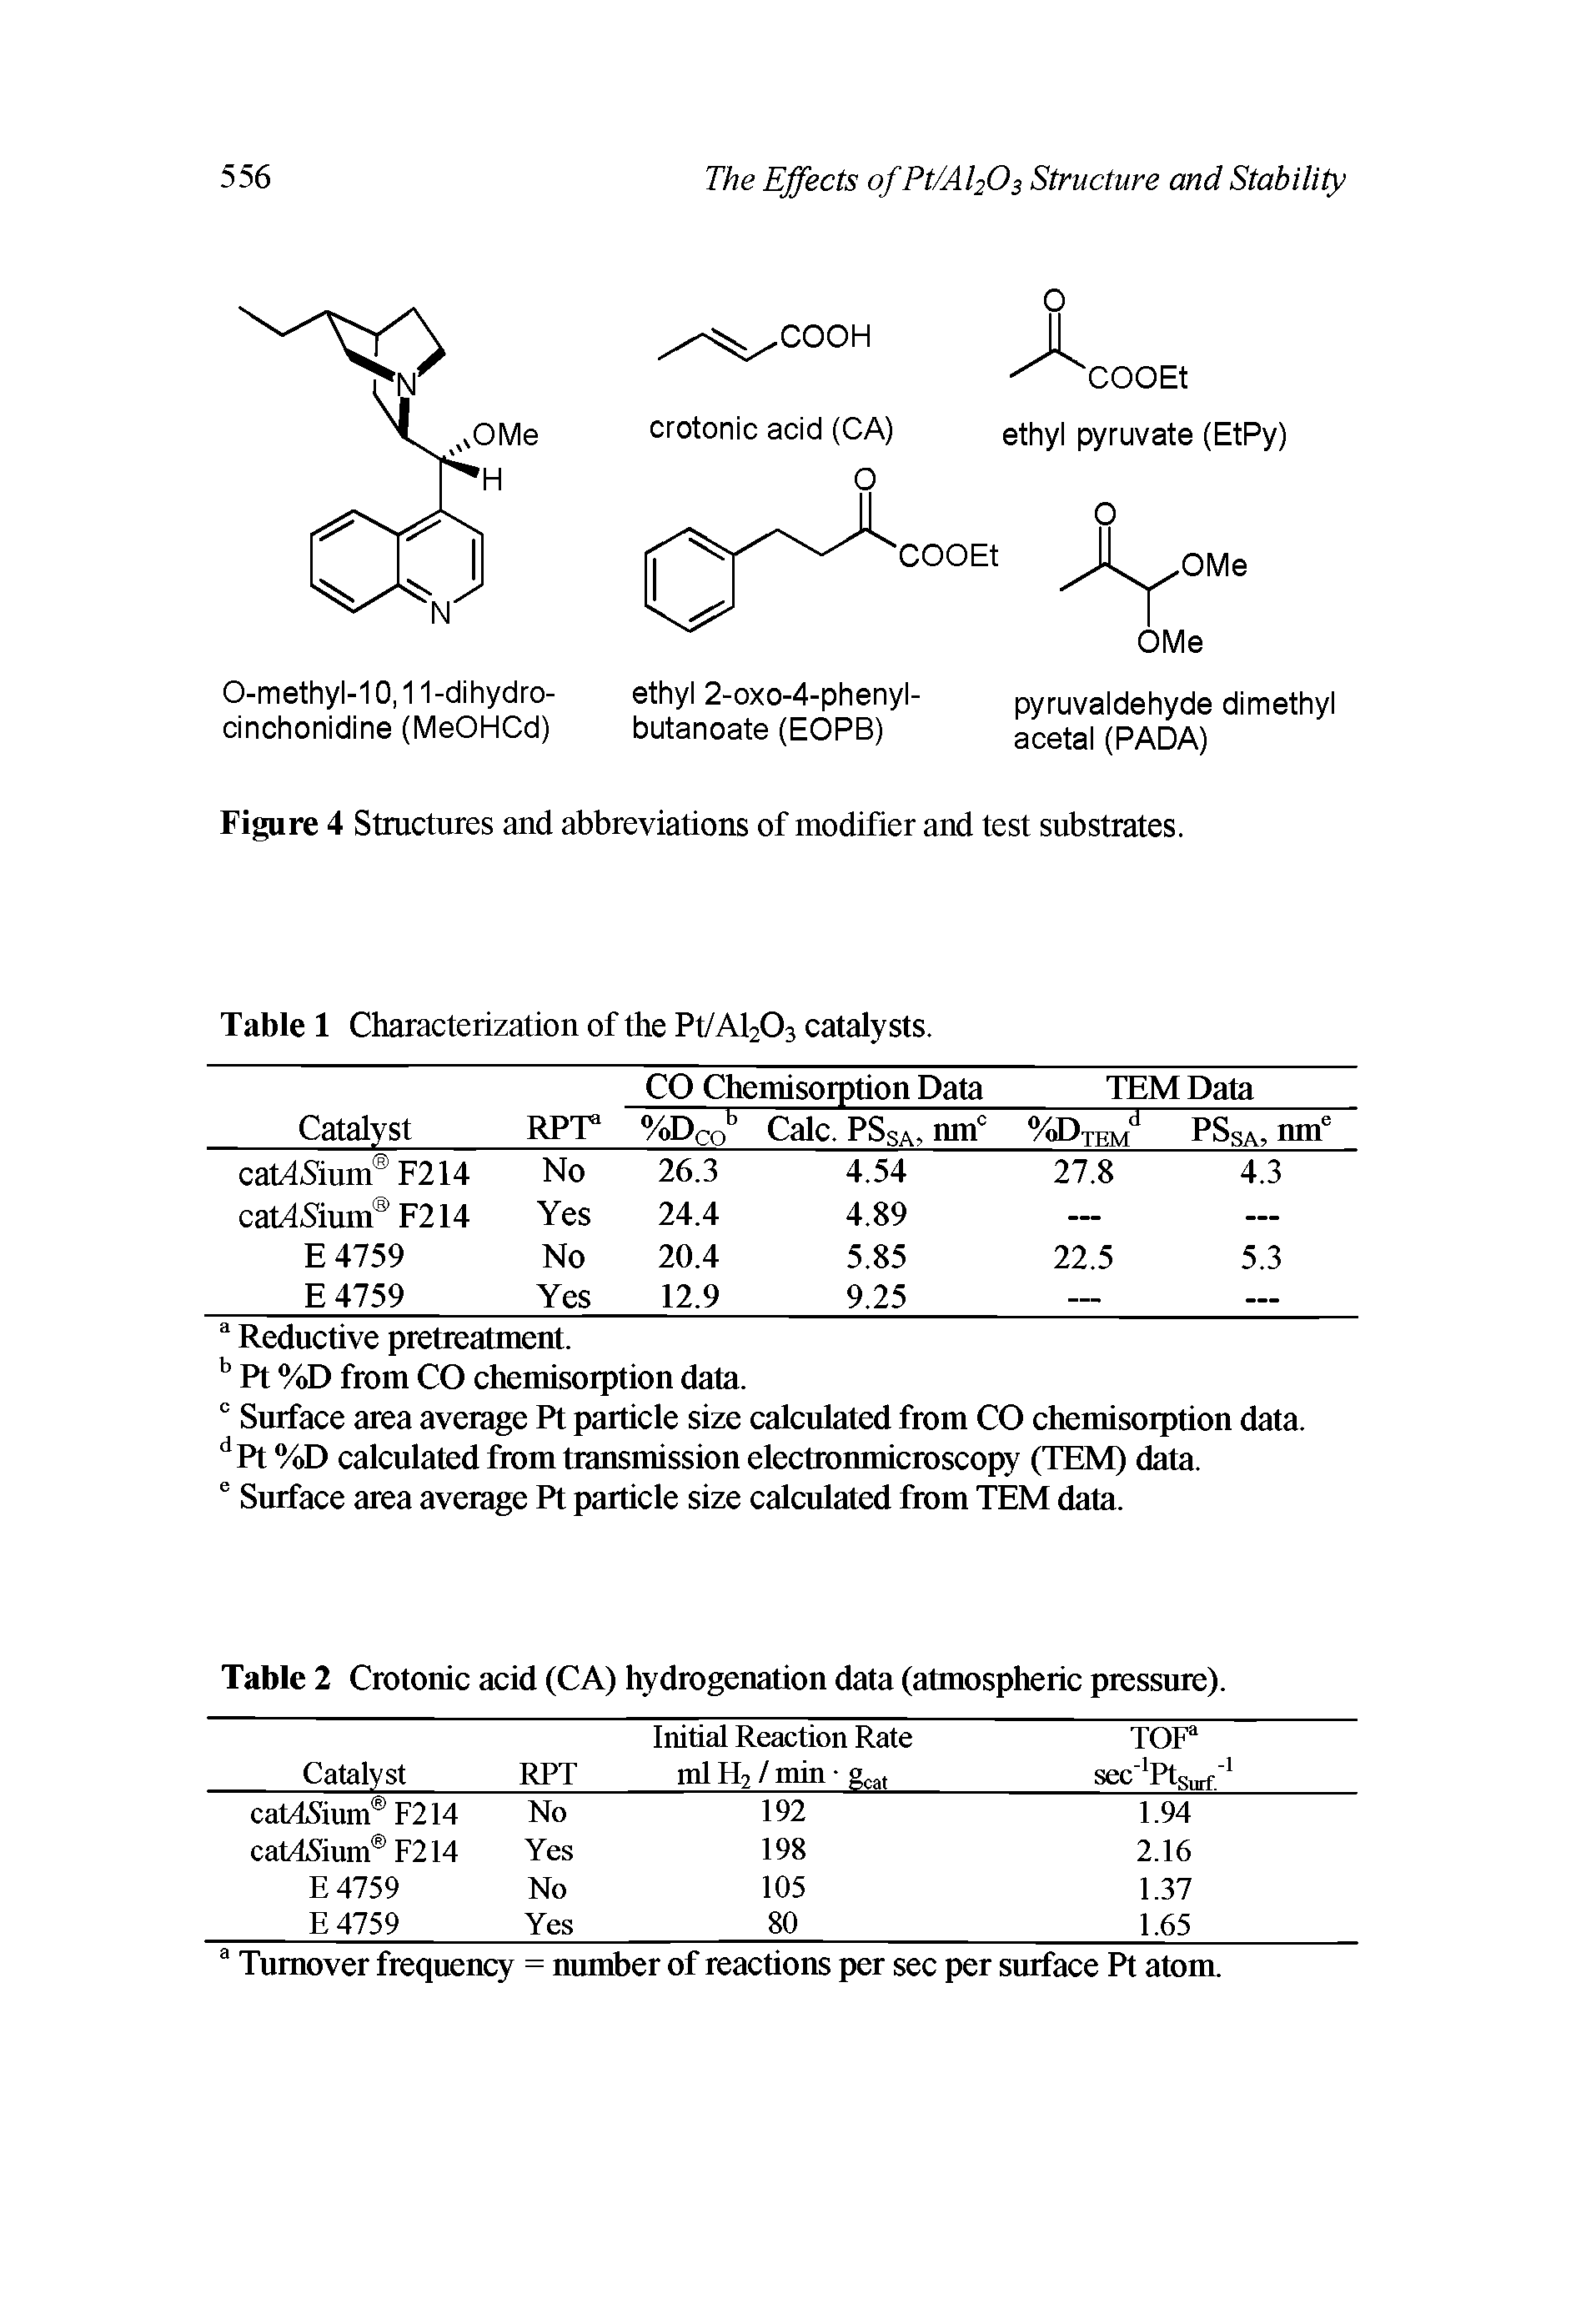 Figure 4 Structures and abbreviations of modifier and test substrates.